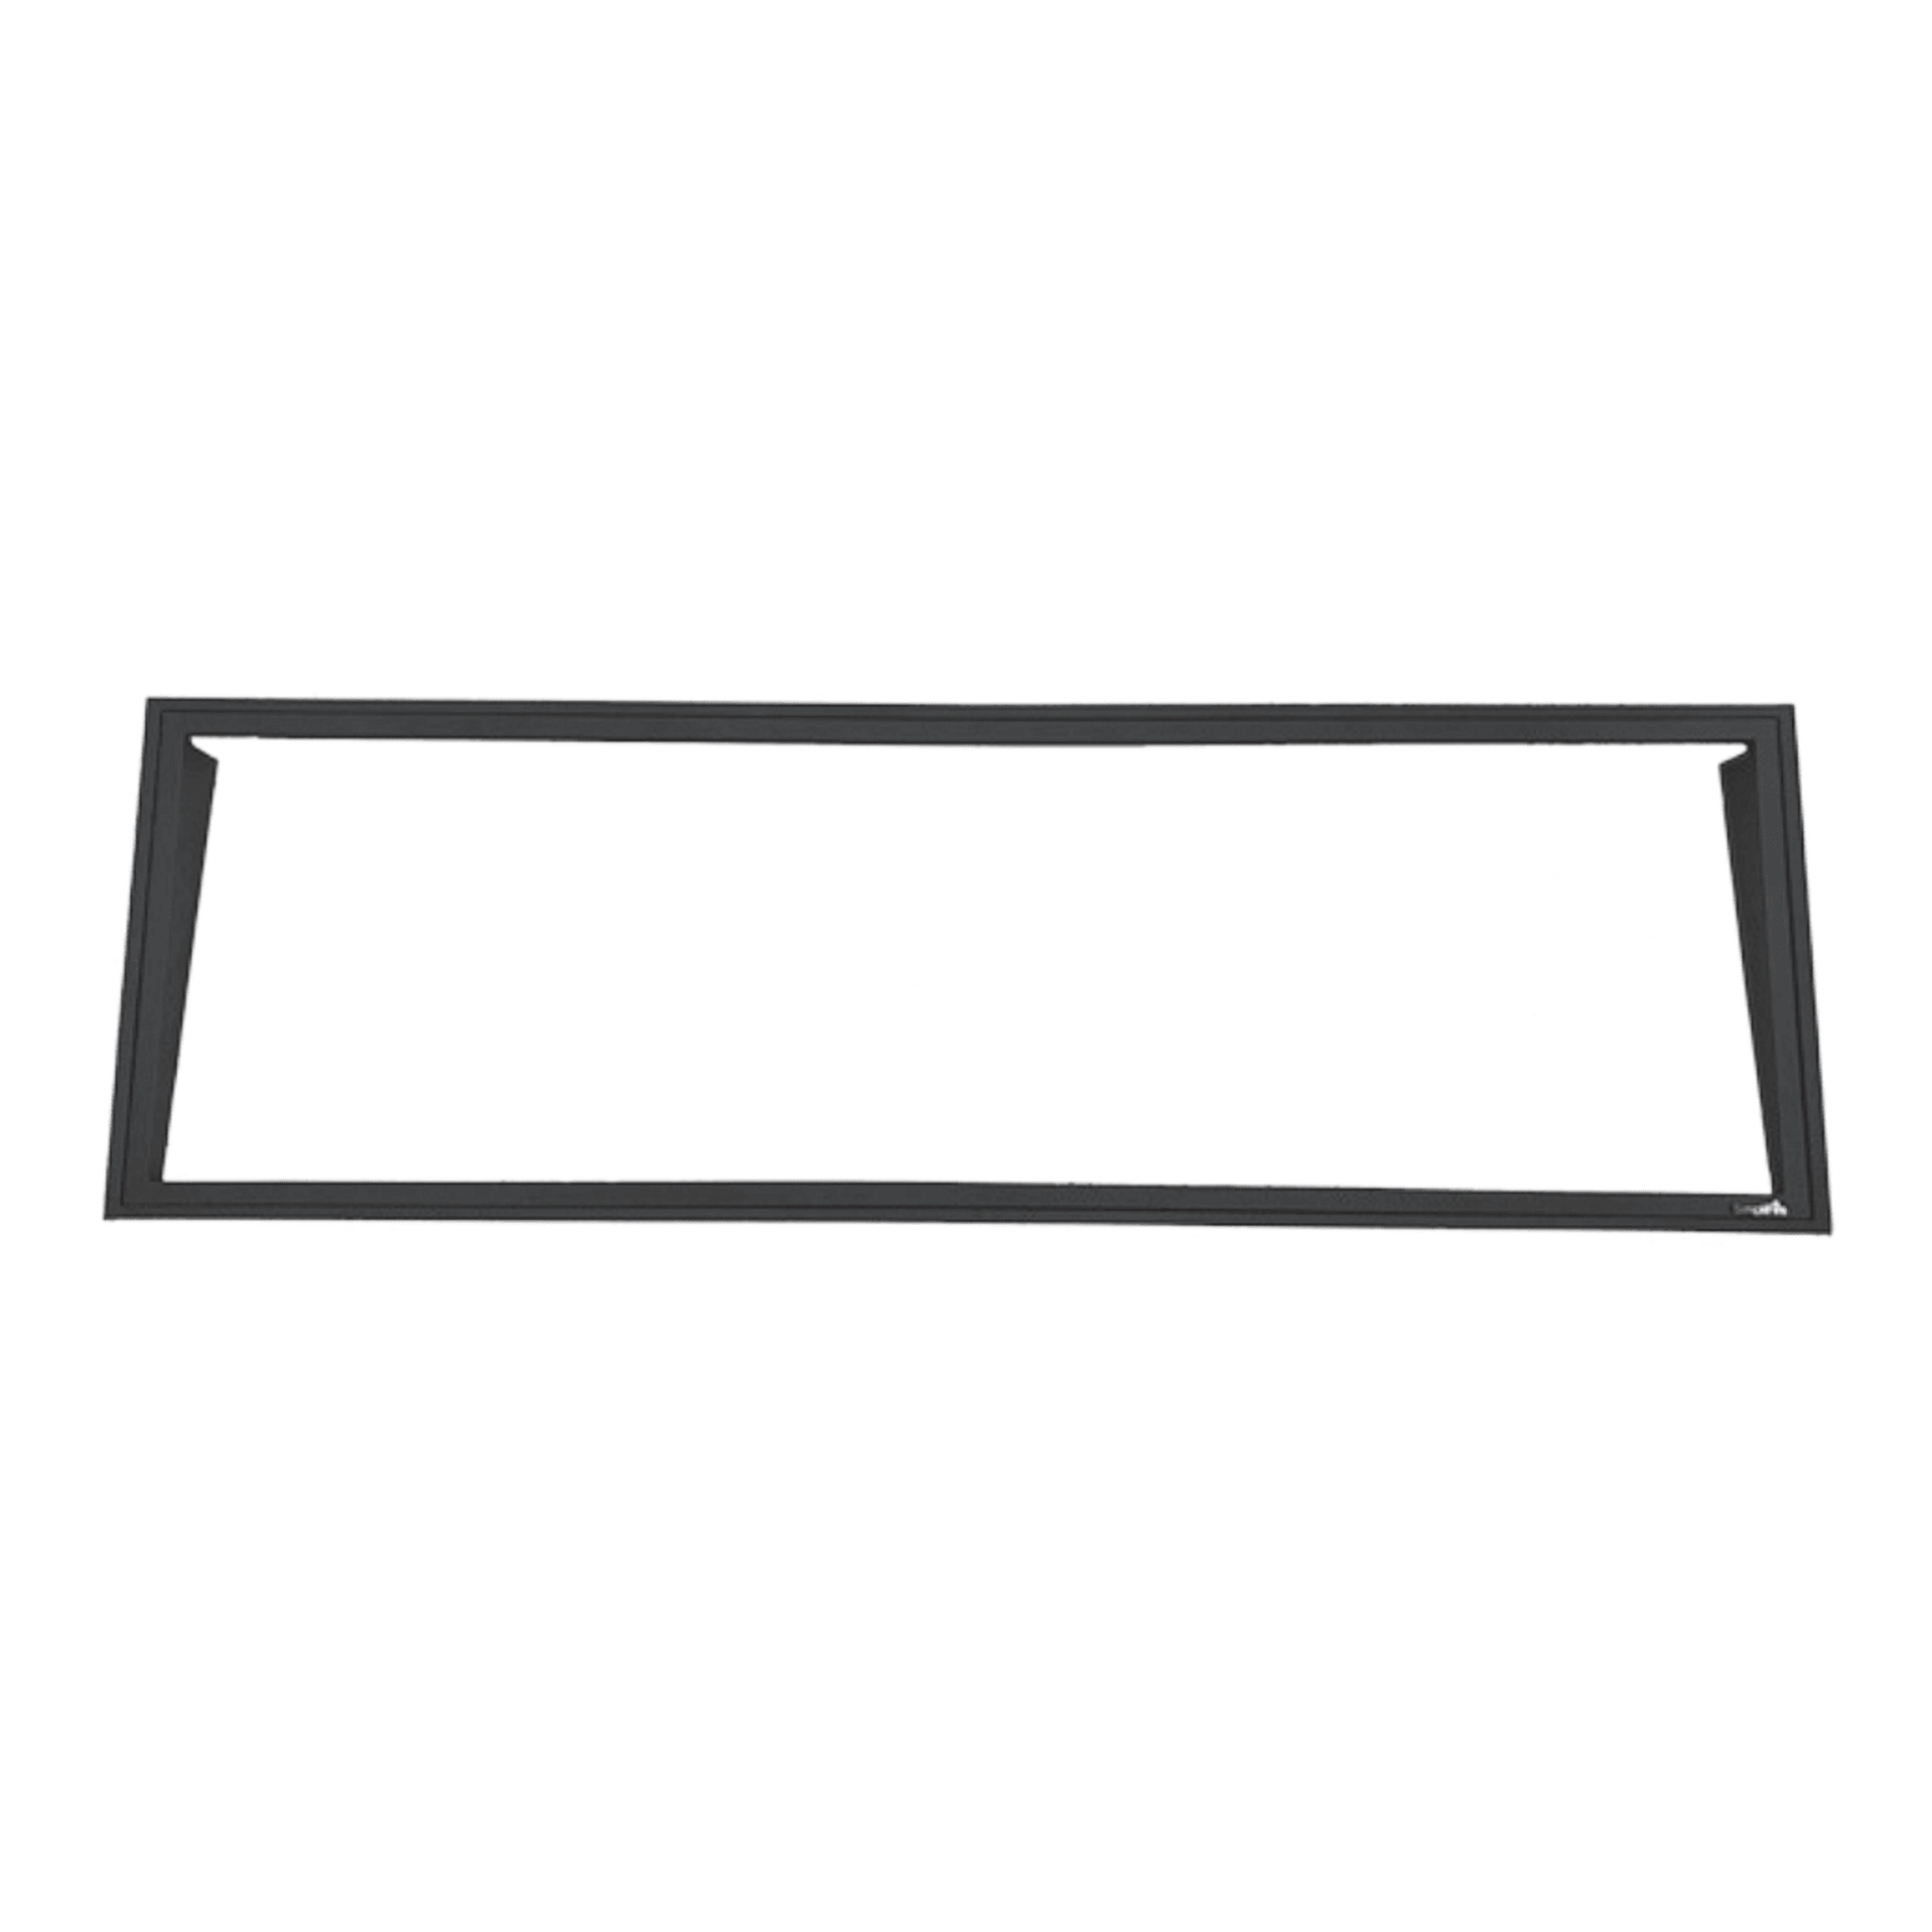 SimpliFire Standard Front for 78" Scion Fireplace